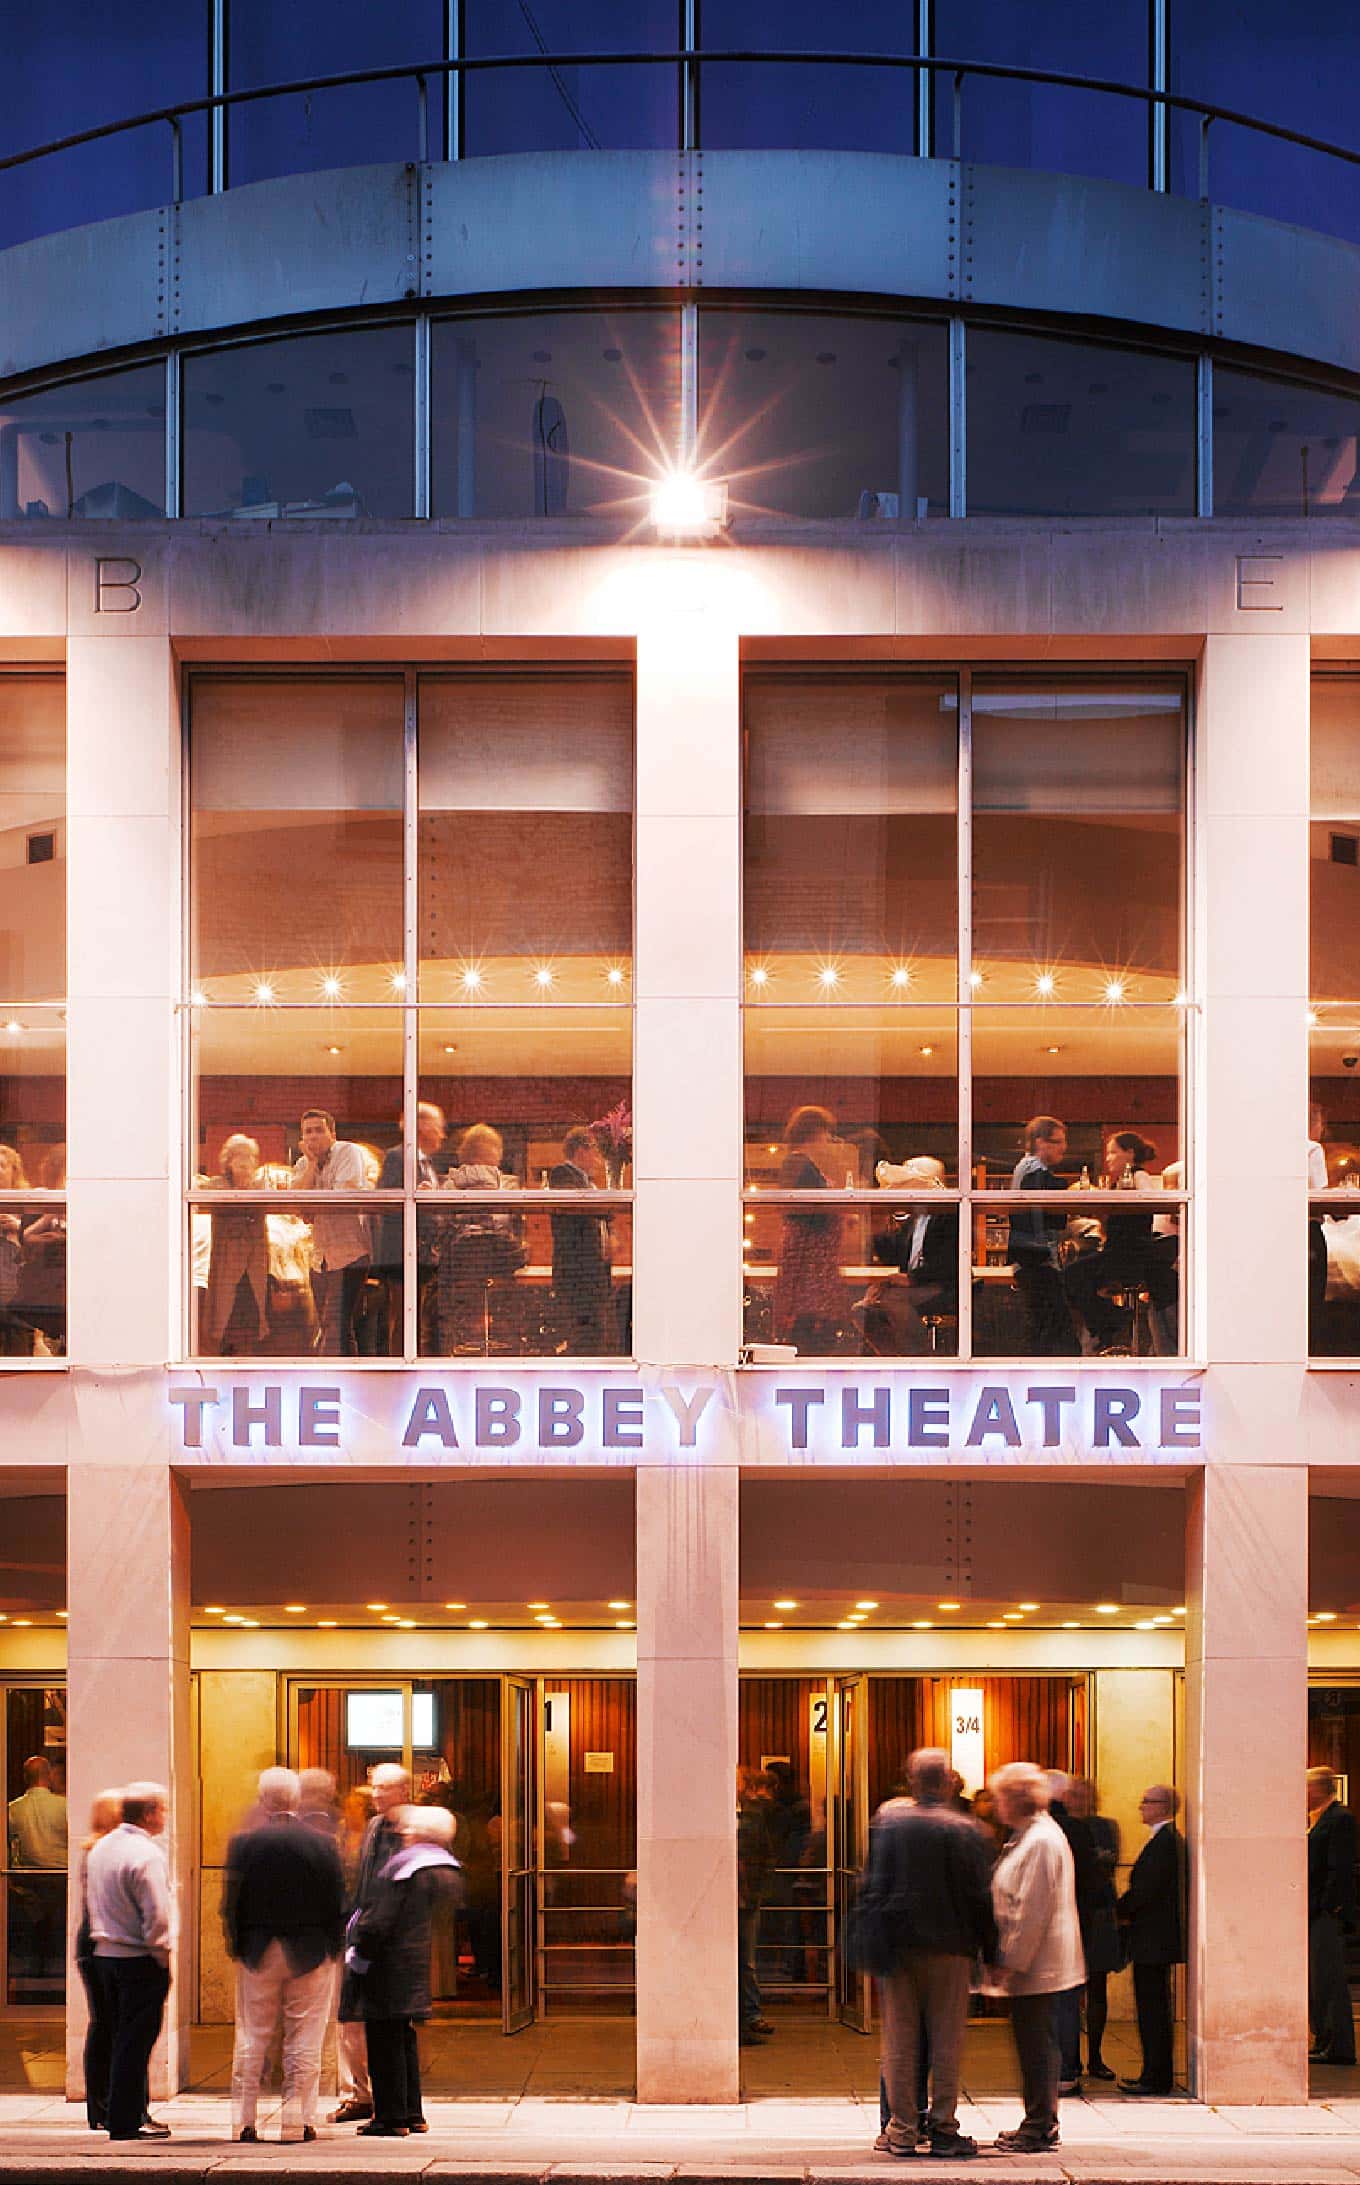 Abbey Theatre photo by Ros Kavanagh